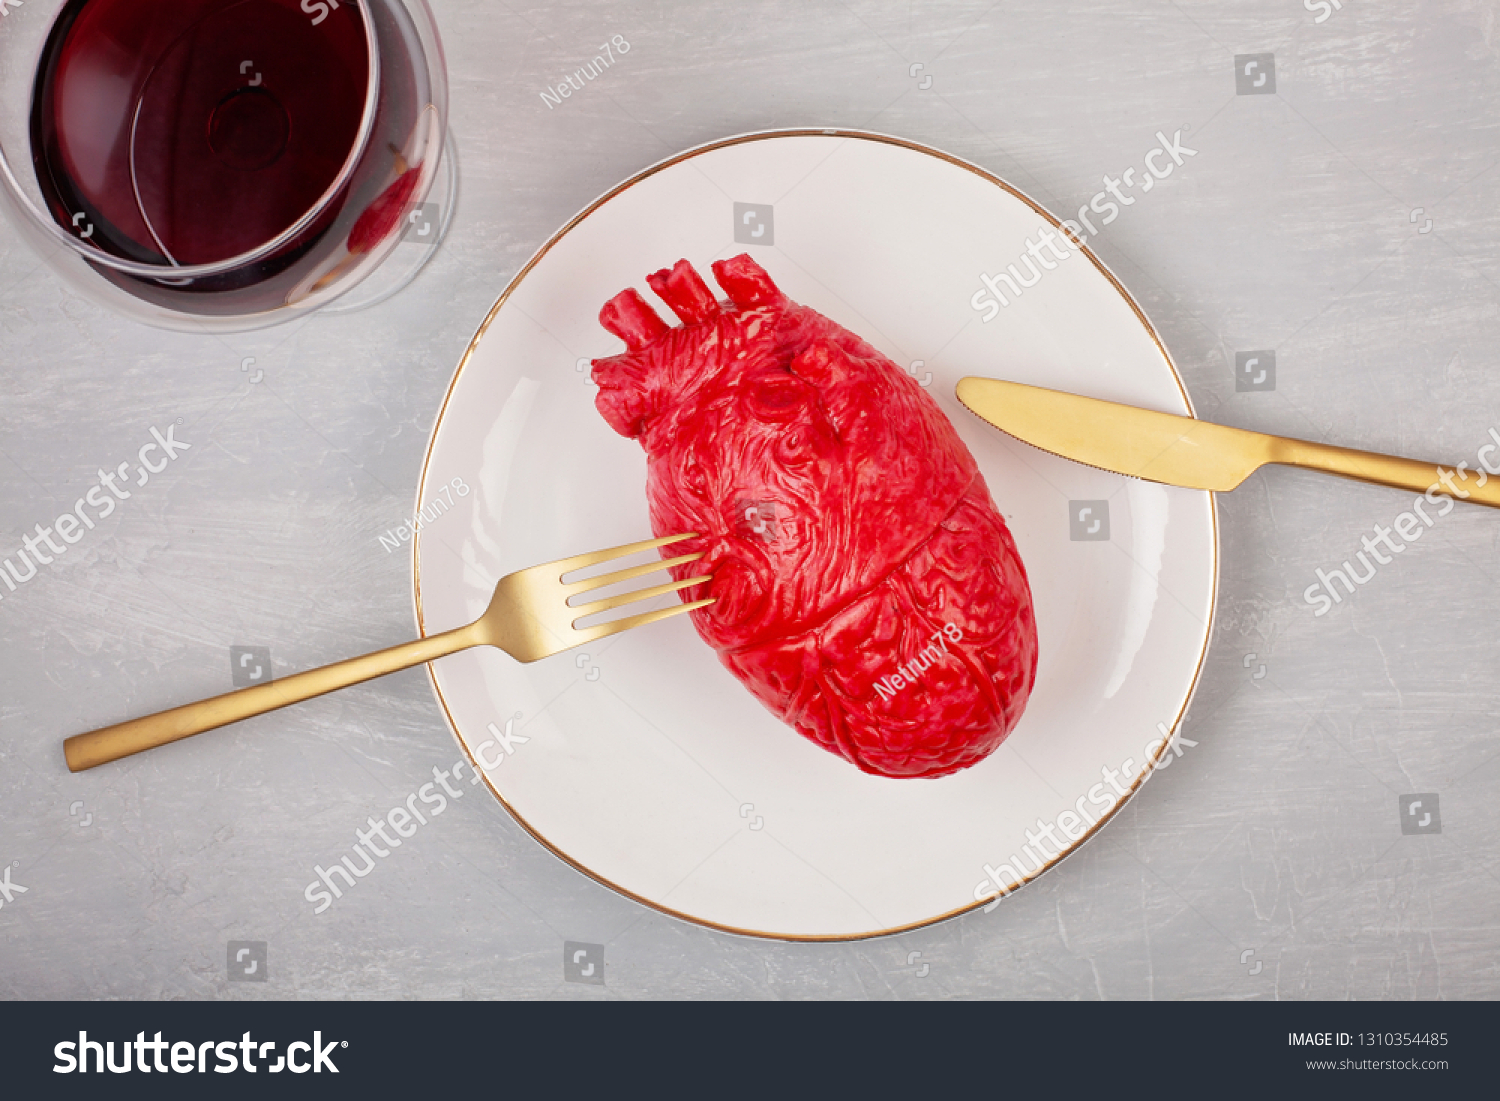 Realistic heart on the dining table in the plate. Love, marriage, proposal, heartbreaker humoristic concept #1310354485